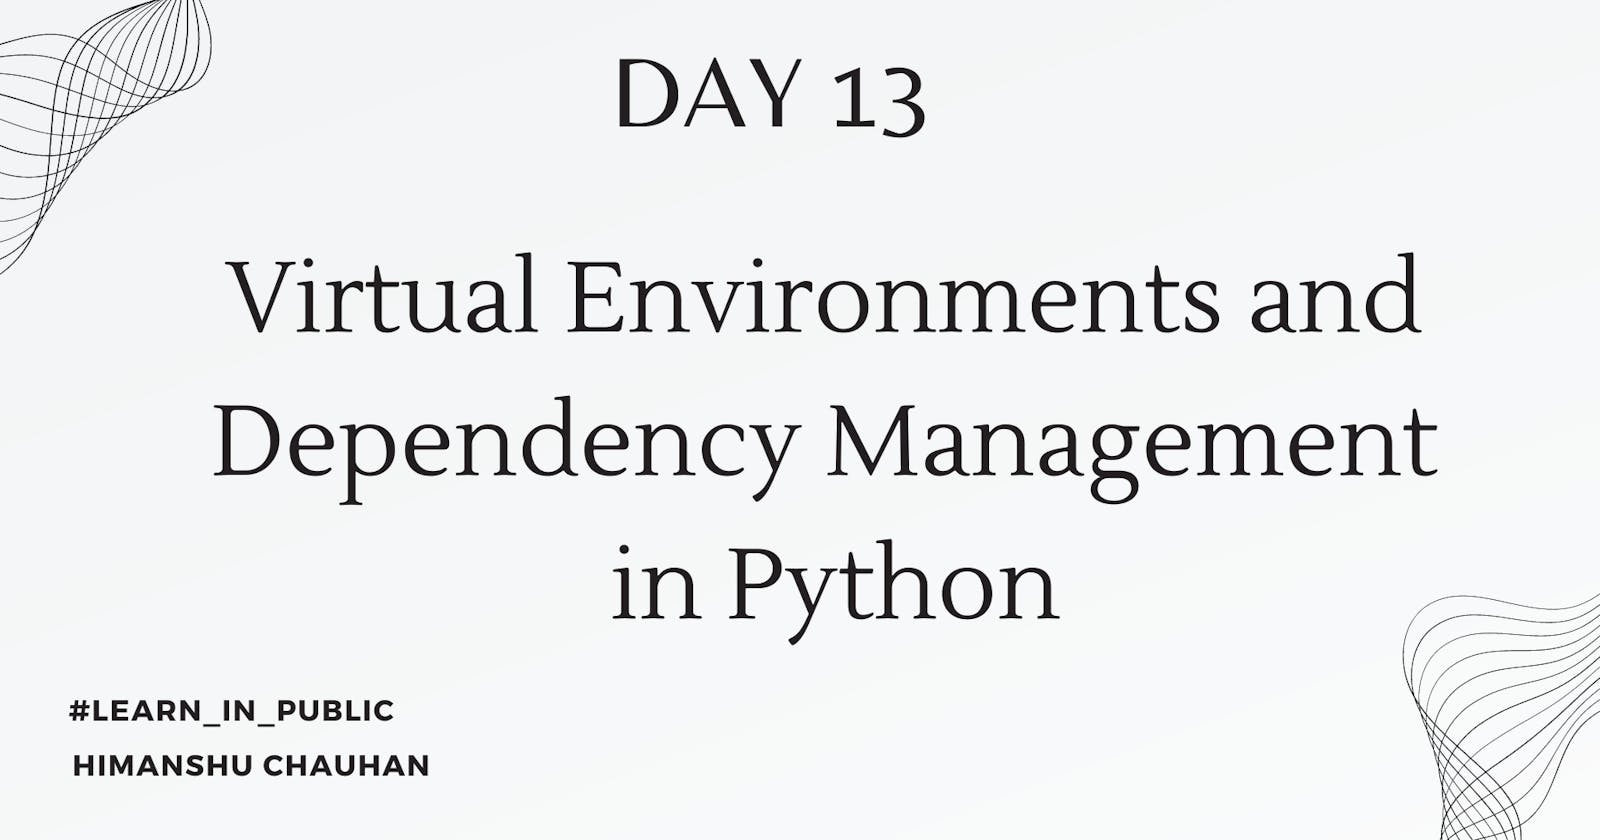 Day 13: Virtual Environments and Dependency Management in Python